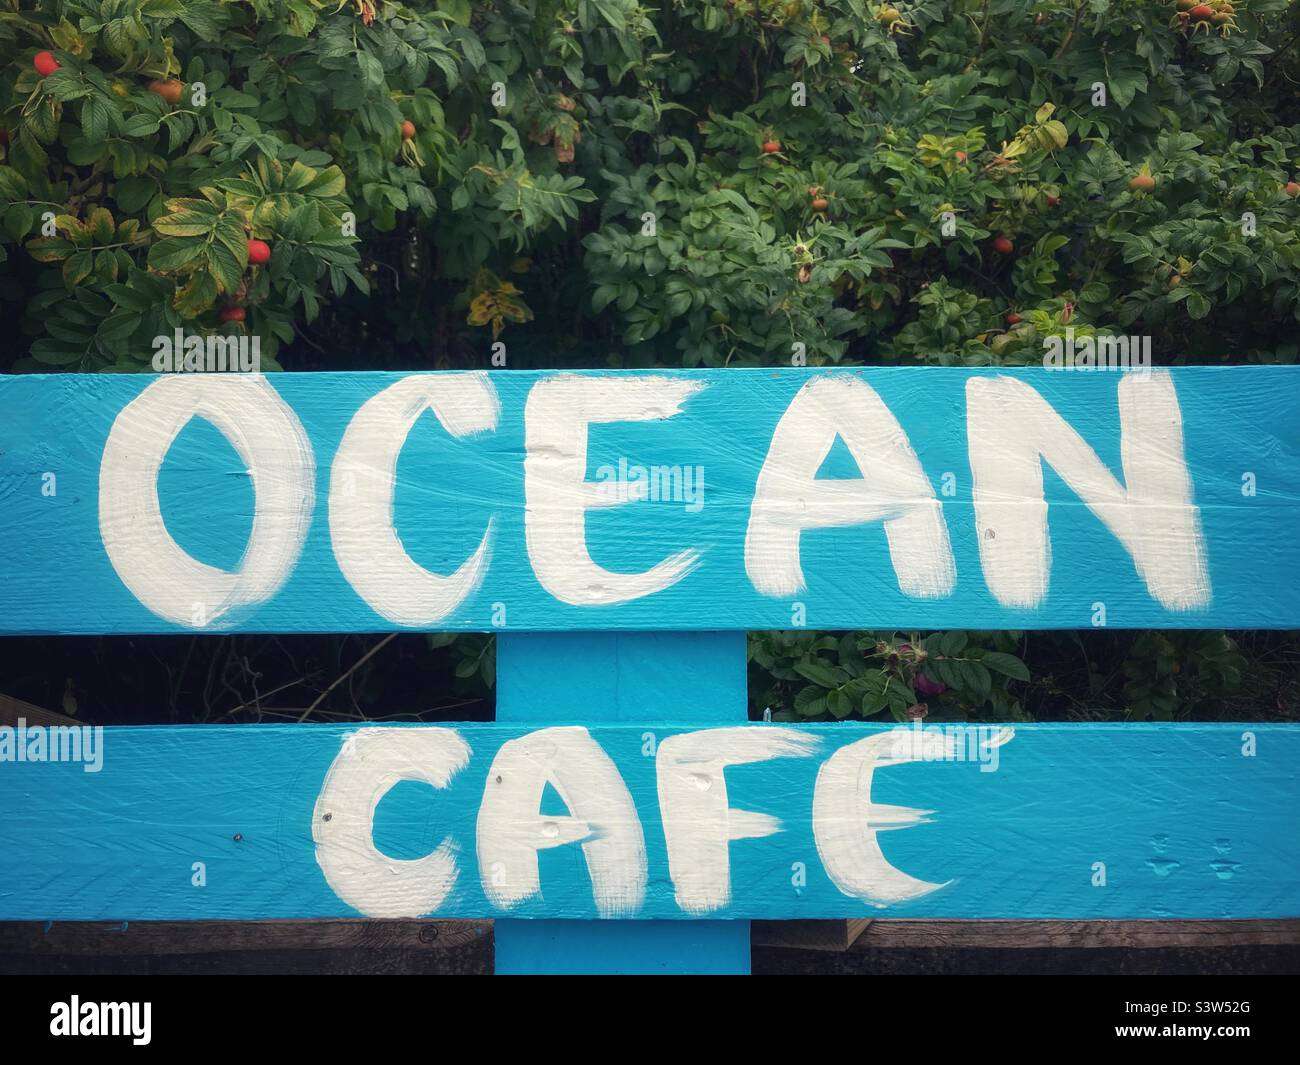 A sign saying Ocean Café with White Letters on Blue Ground Stock Photo